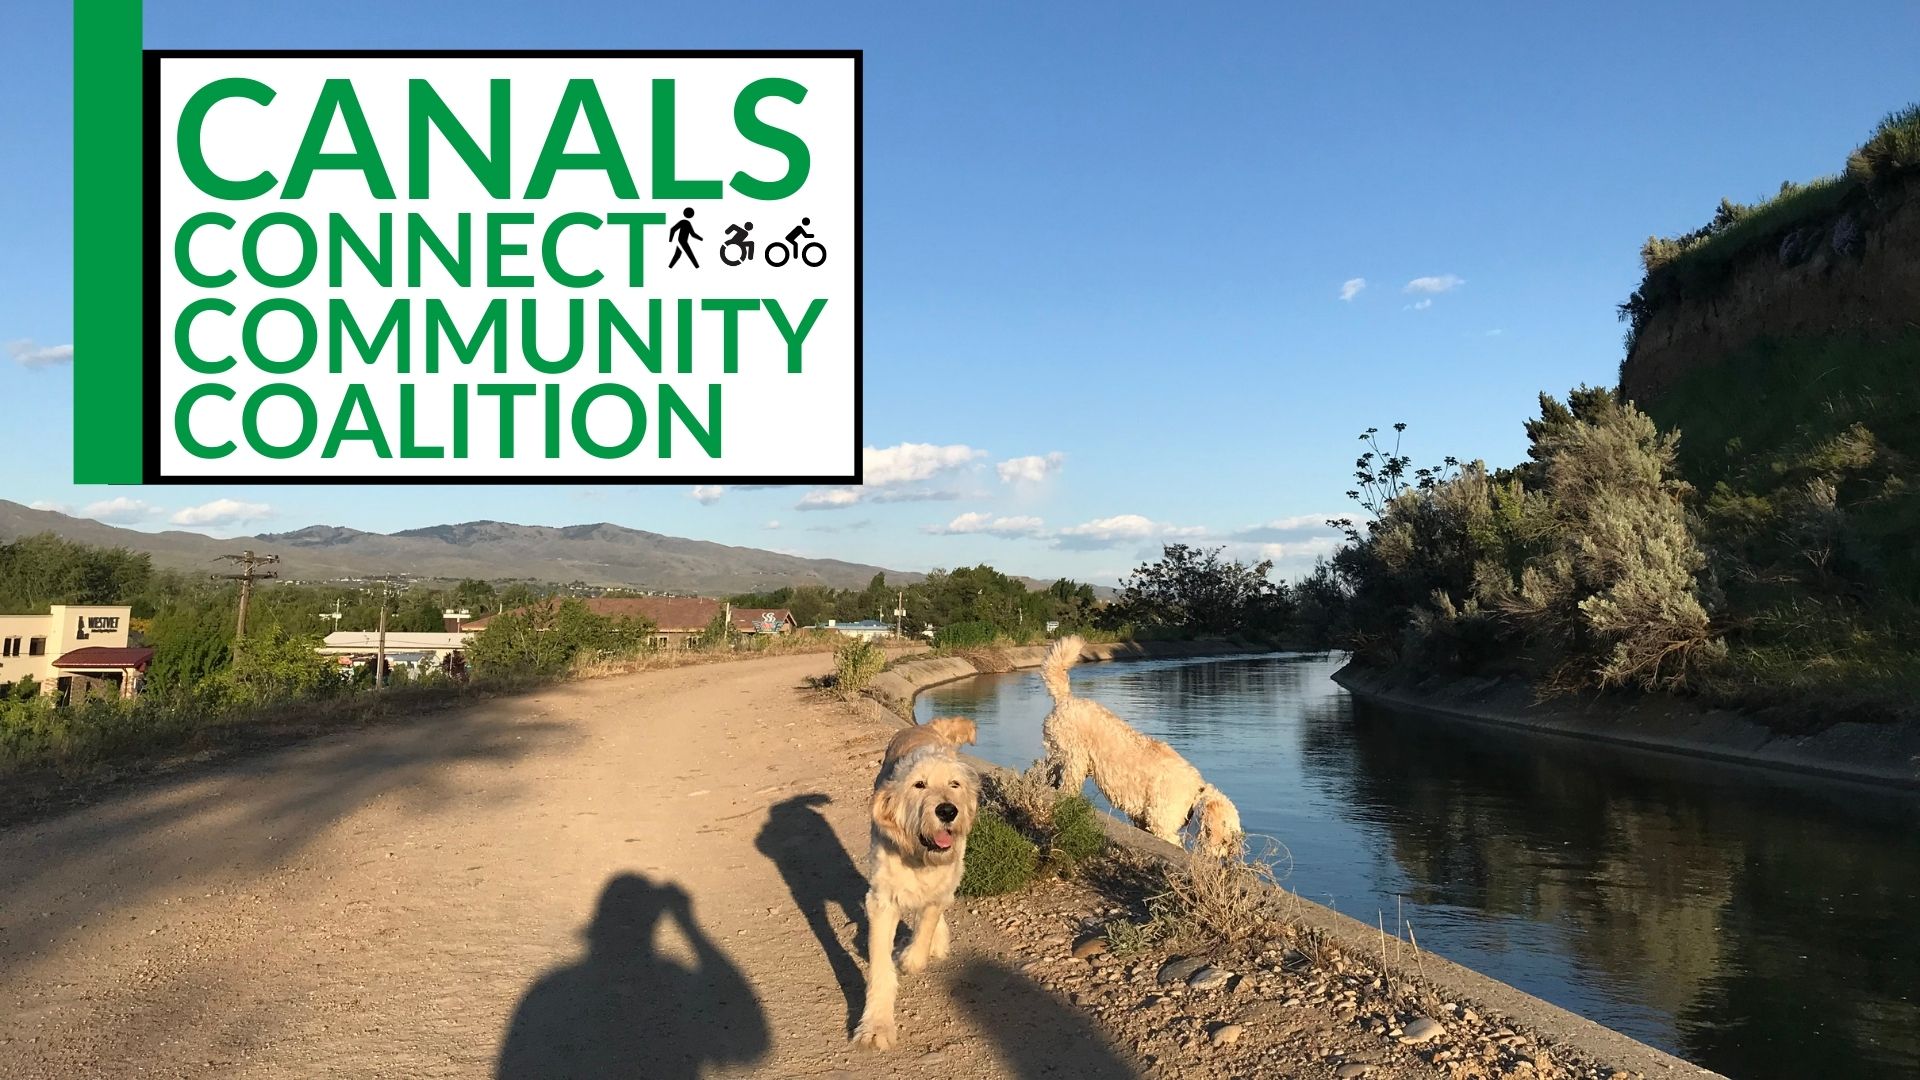 Canal Connects Community Coalition graphic with dog running by canal